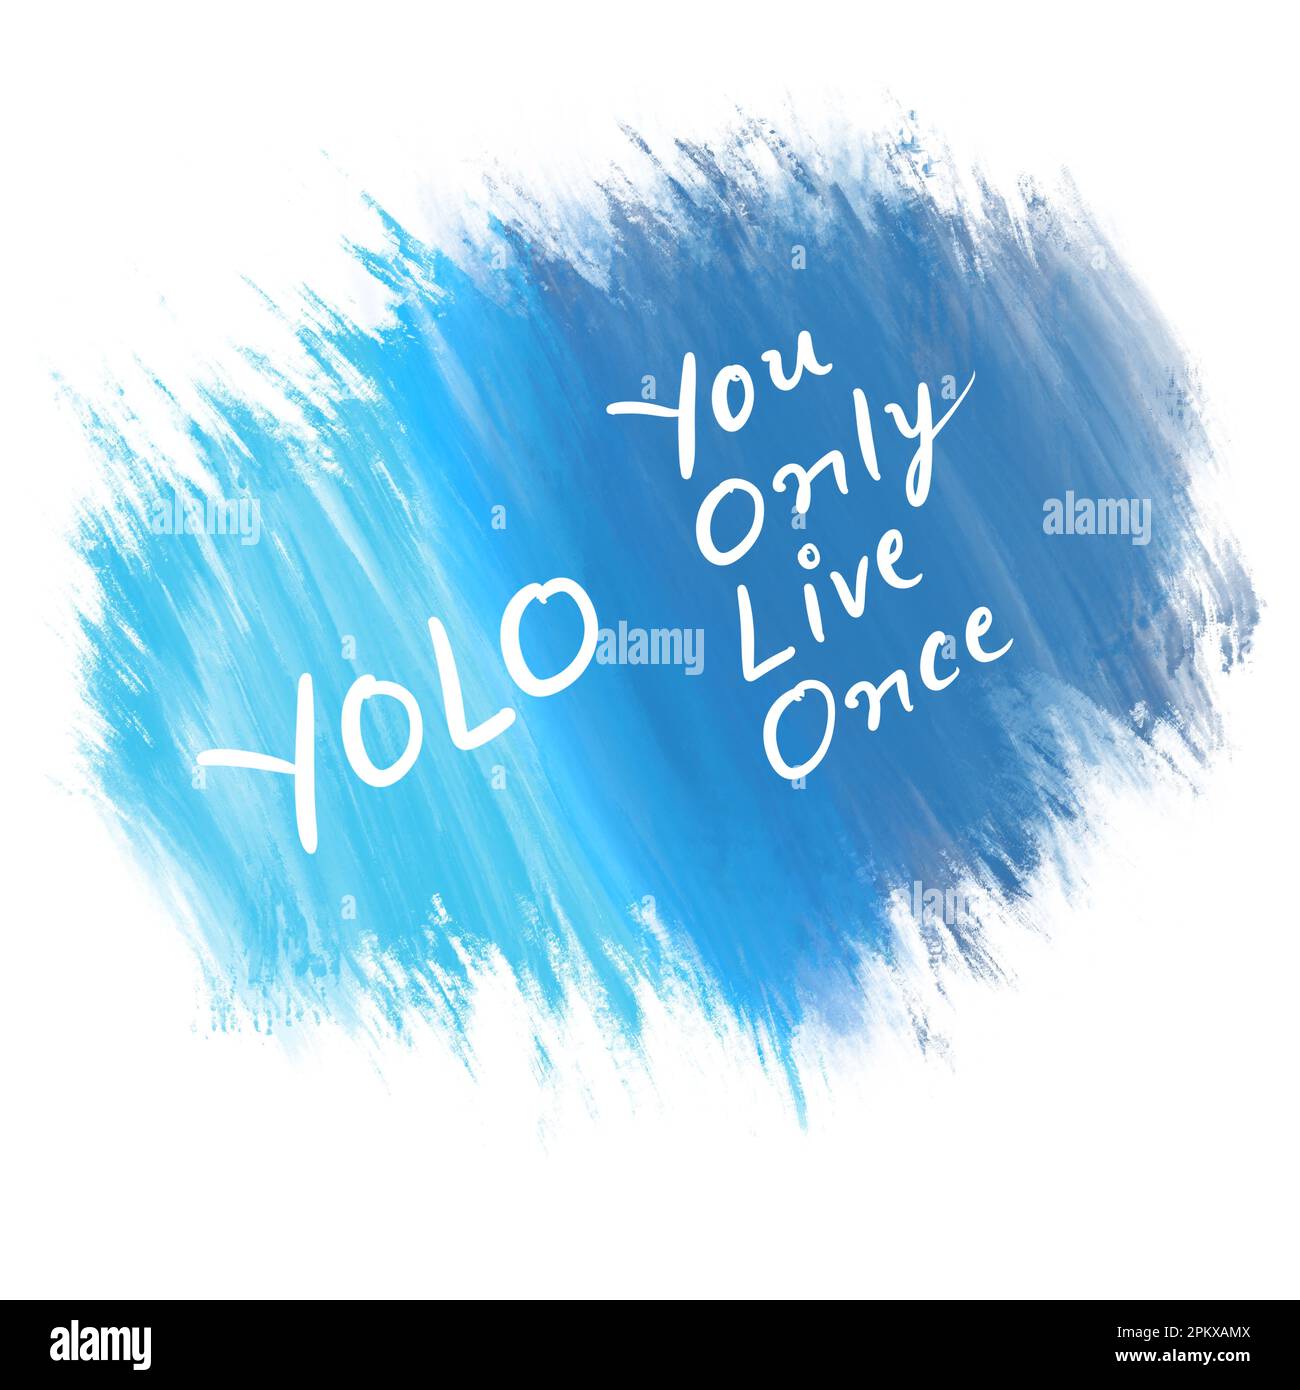 YOLO - You Only Live Once Blue Spatter Painting Text Stock Photo